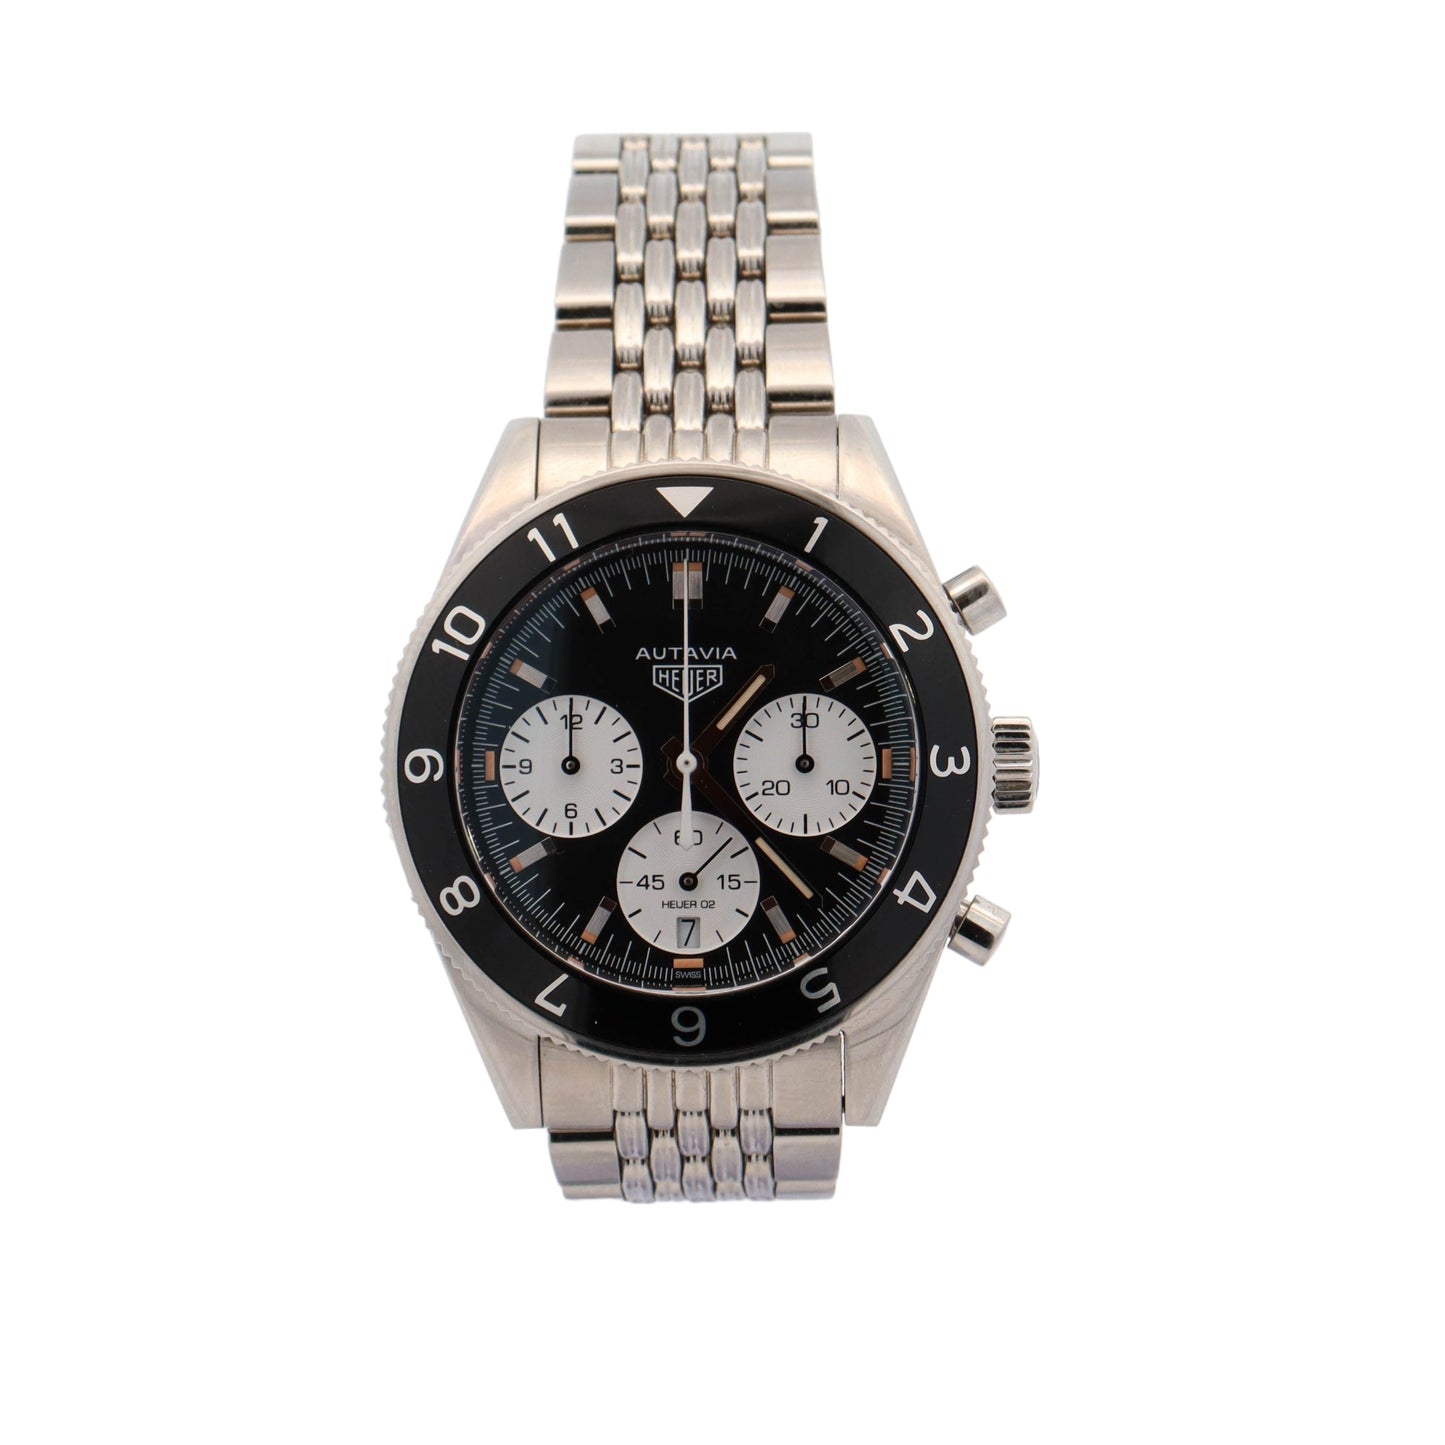 Tag Heuer Autavia Stainless Steel 42mm Black Chronograph Dial Watch Reference #: CBE2110-0 - Happy Jewelers Fine Jewelry Lifetime Warranty